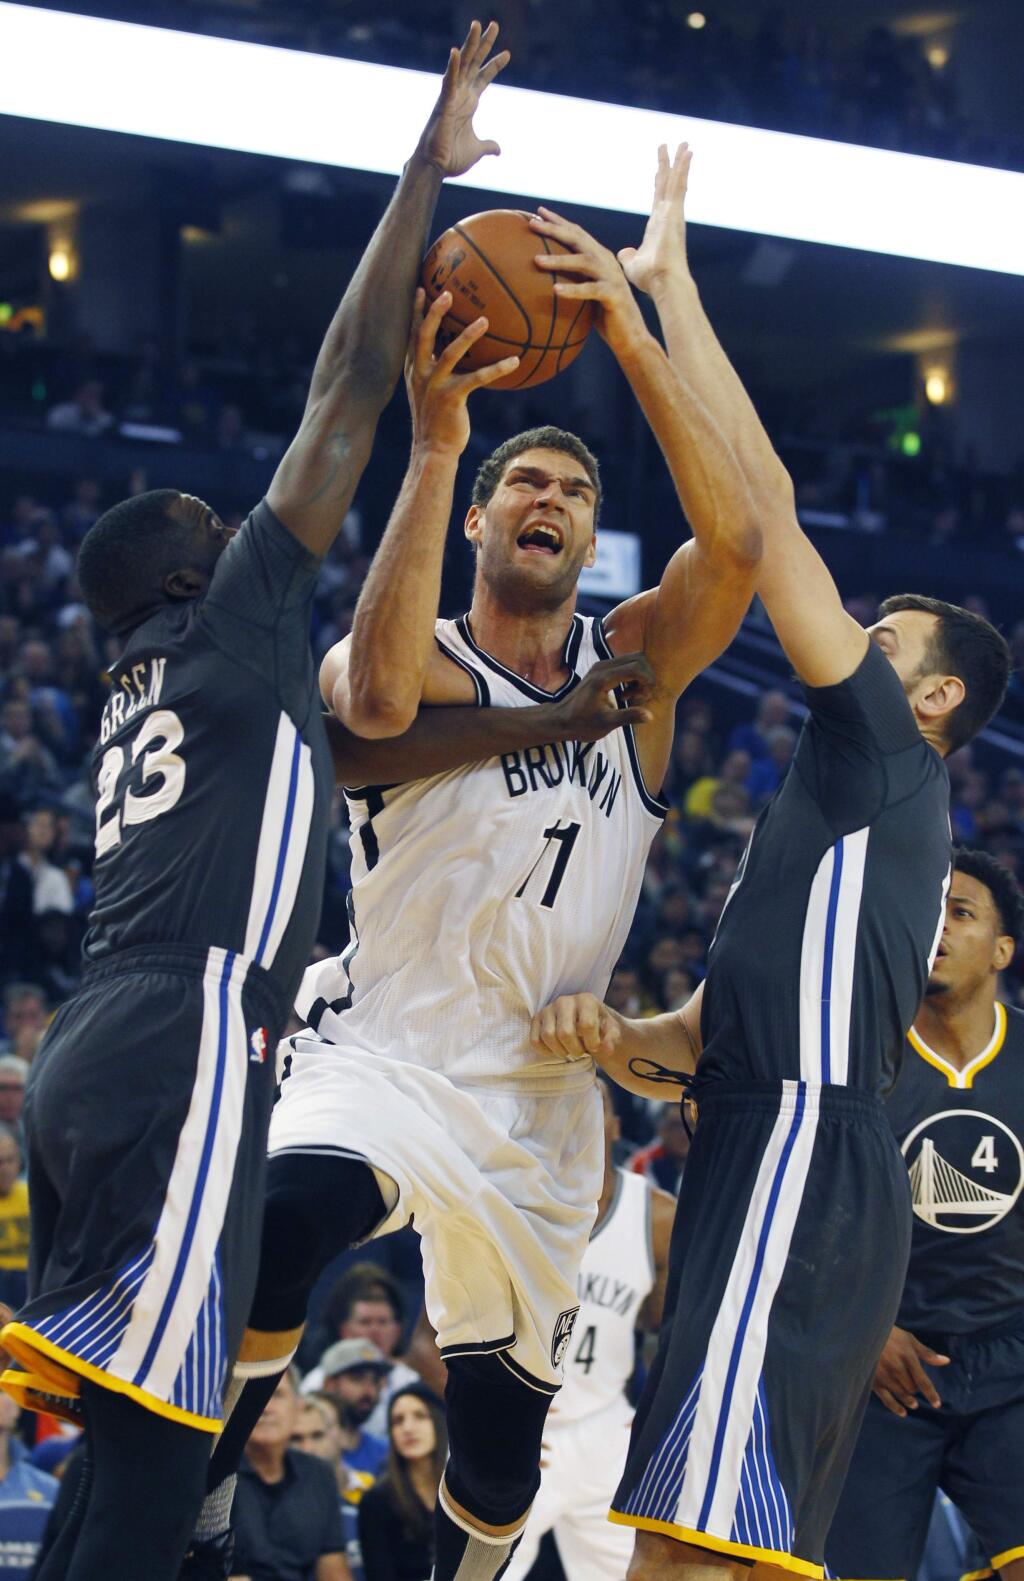 Brooklyn Nets' Brook Lopez, center goes up between Golden State Warriors' Draymond Green, left, and Andrew Bogut during the first half of an NBA basketball game, Saturday, Nov. 14, 2015, in Oakland, Calif. (AP Photo/George Nikitin)